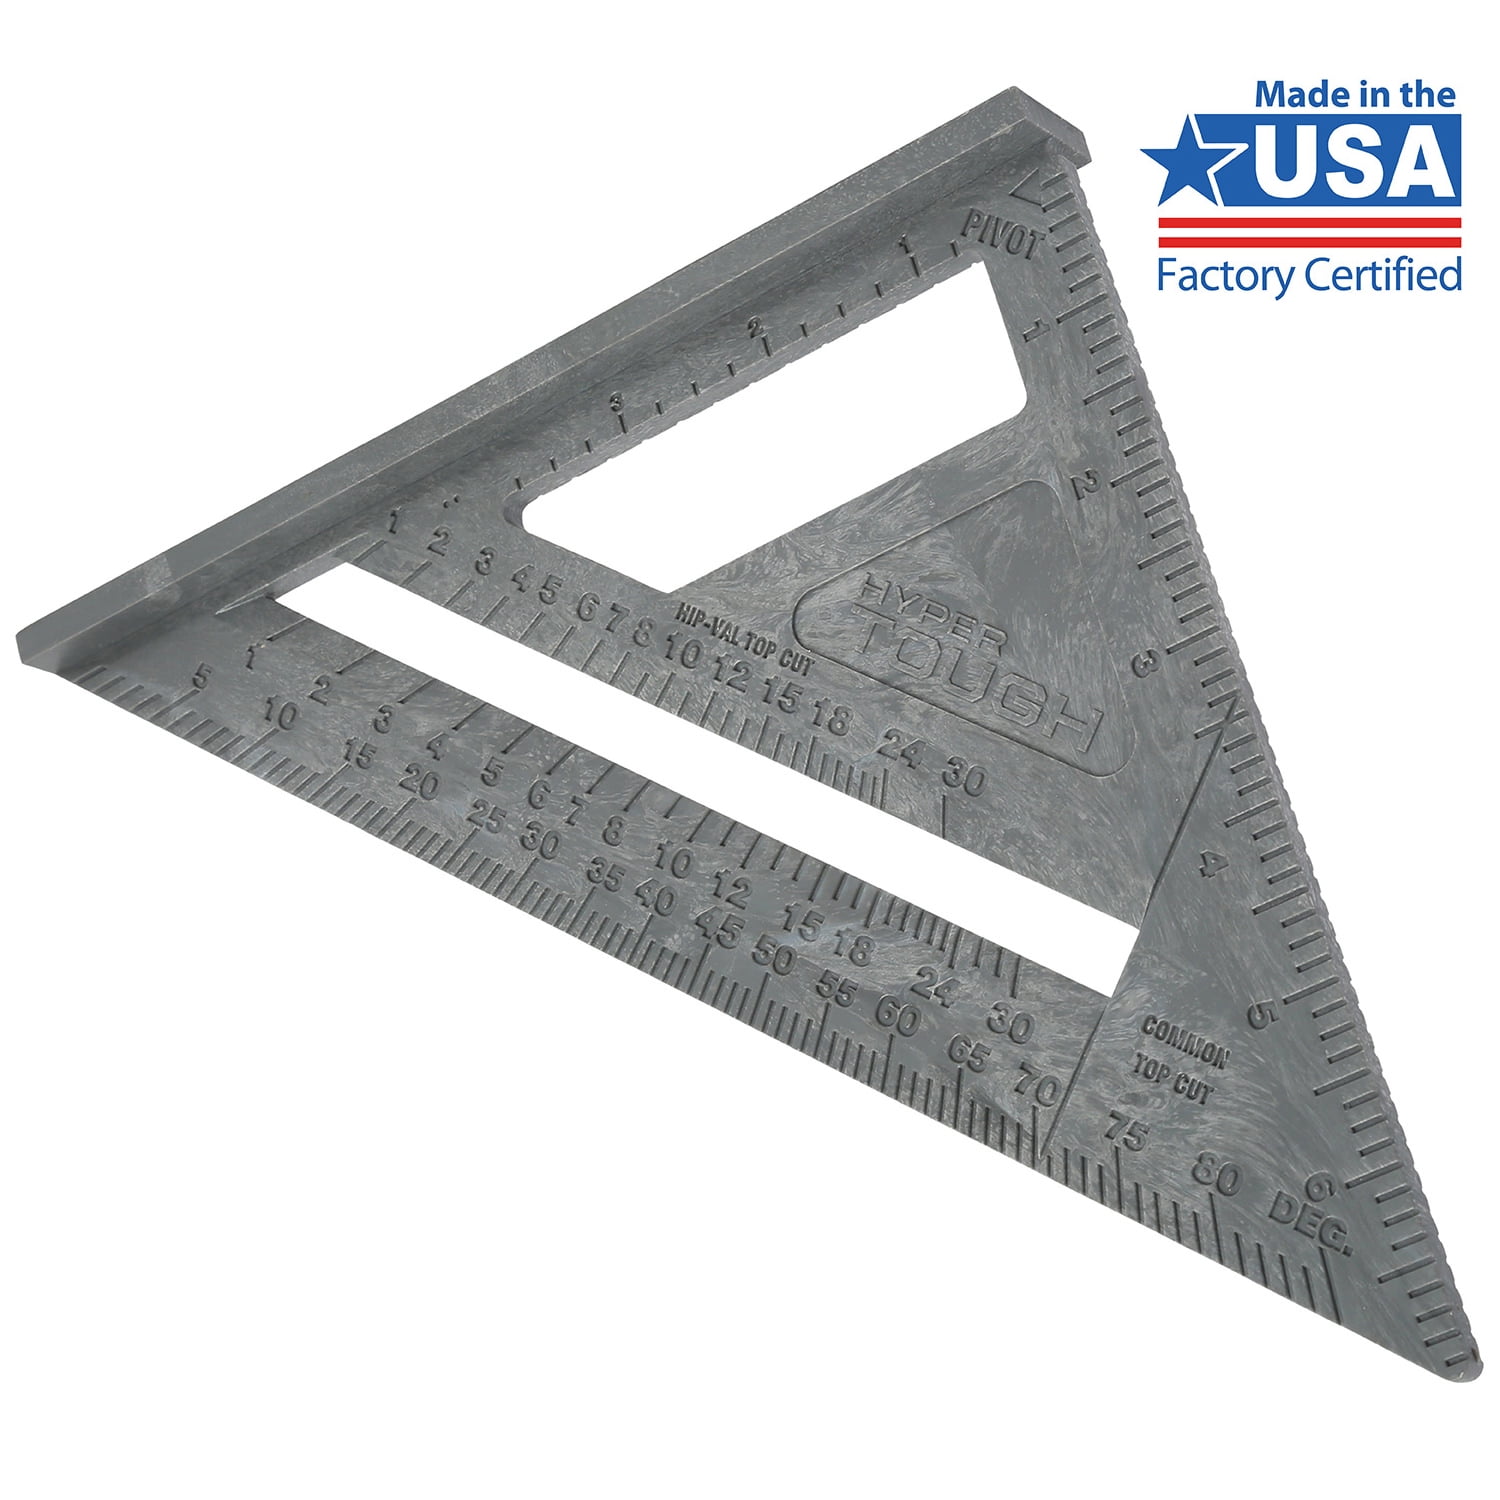 7" ROOFING SPEED SQUARE ALUMINIUM ALLOY RAFTER ANGLE MEASURE TRIANGLE GUIDE 27D 